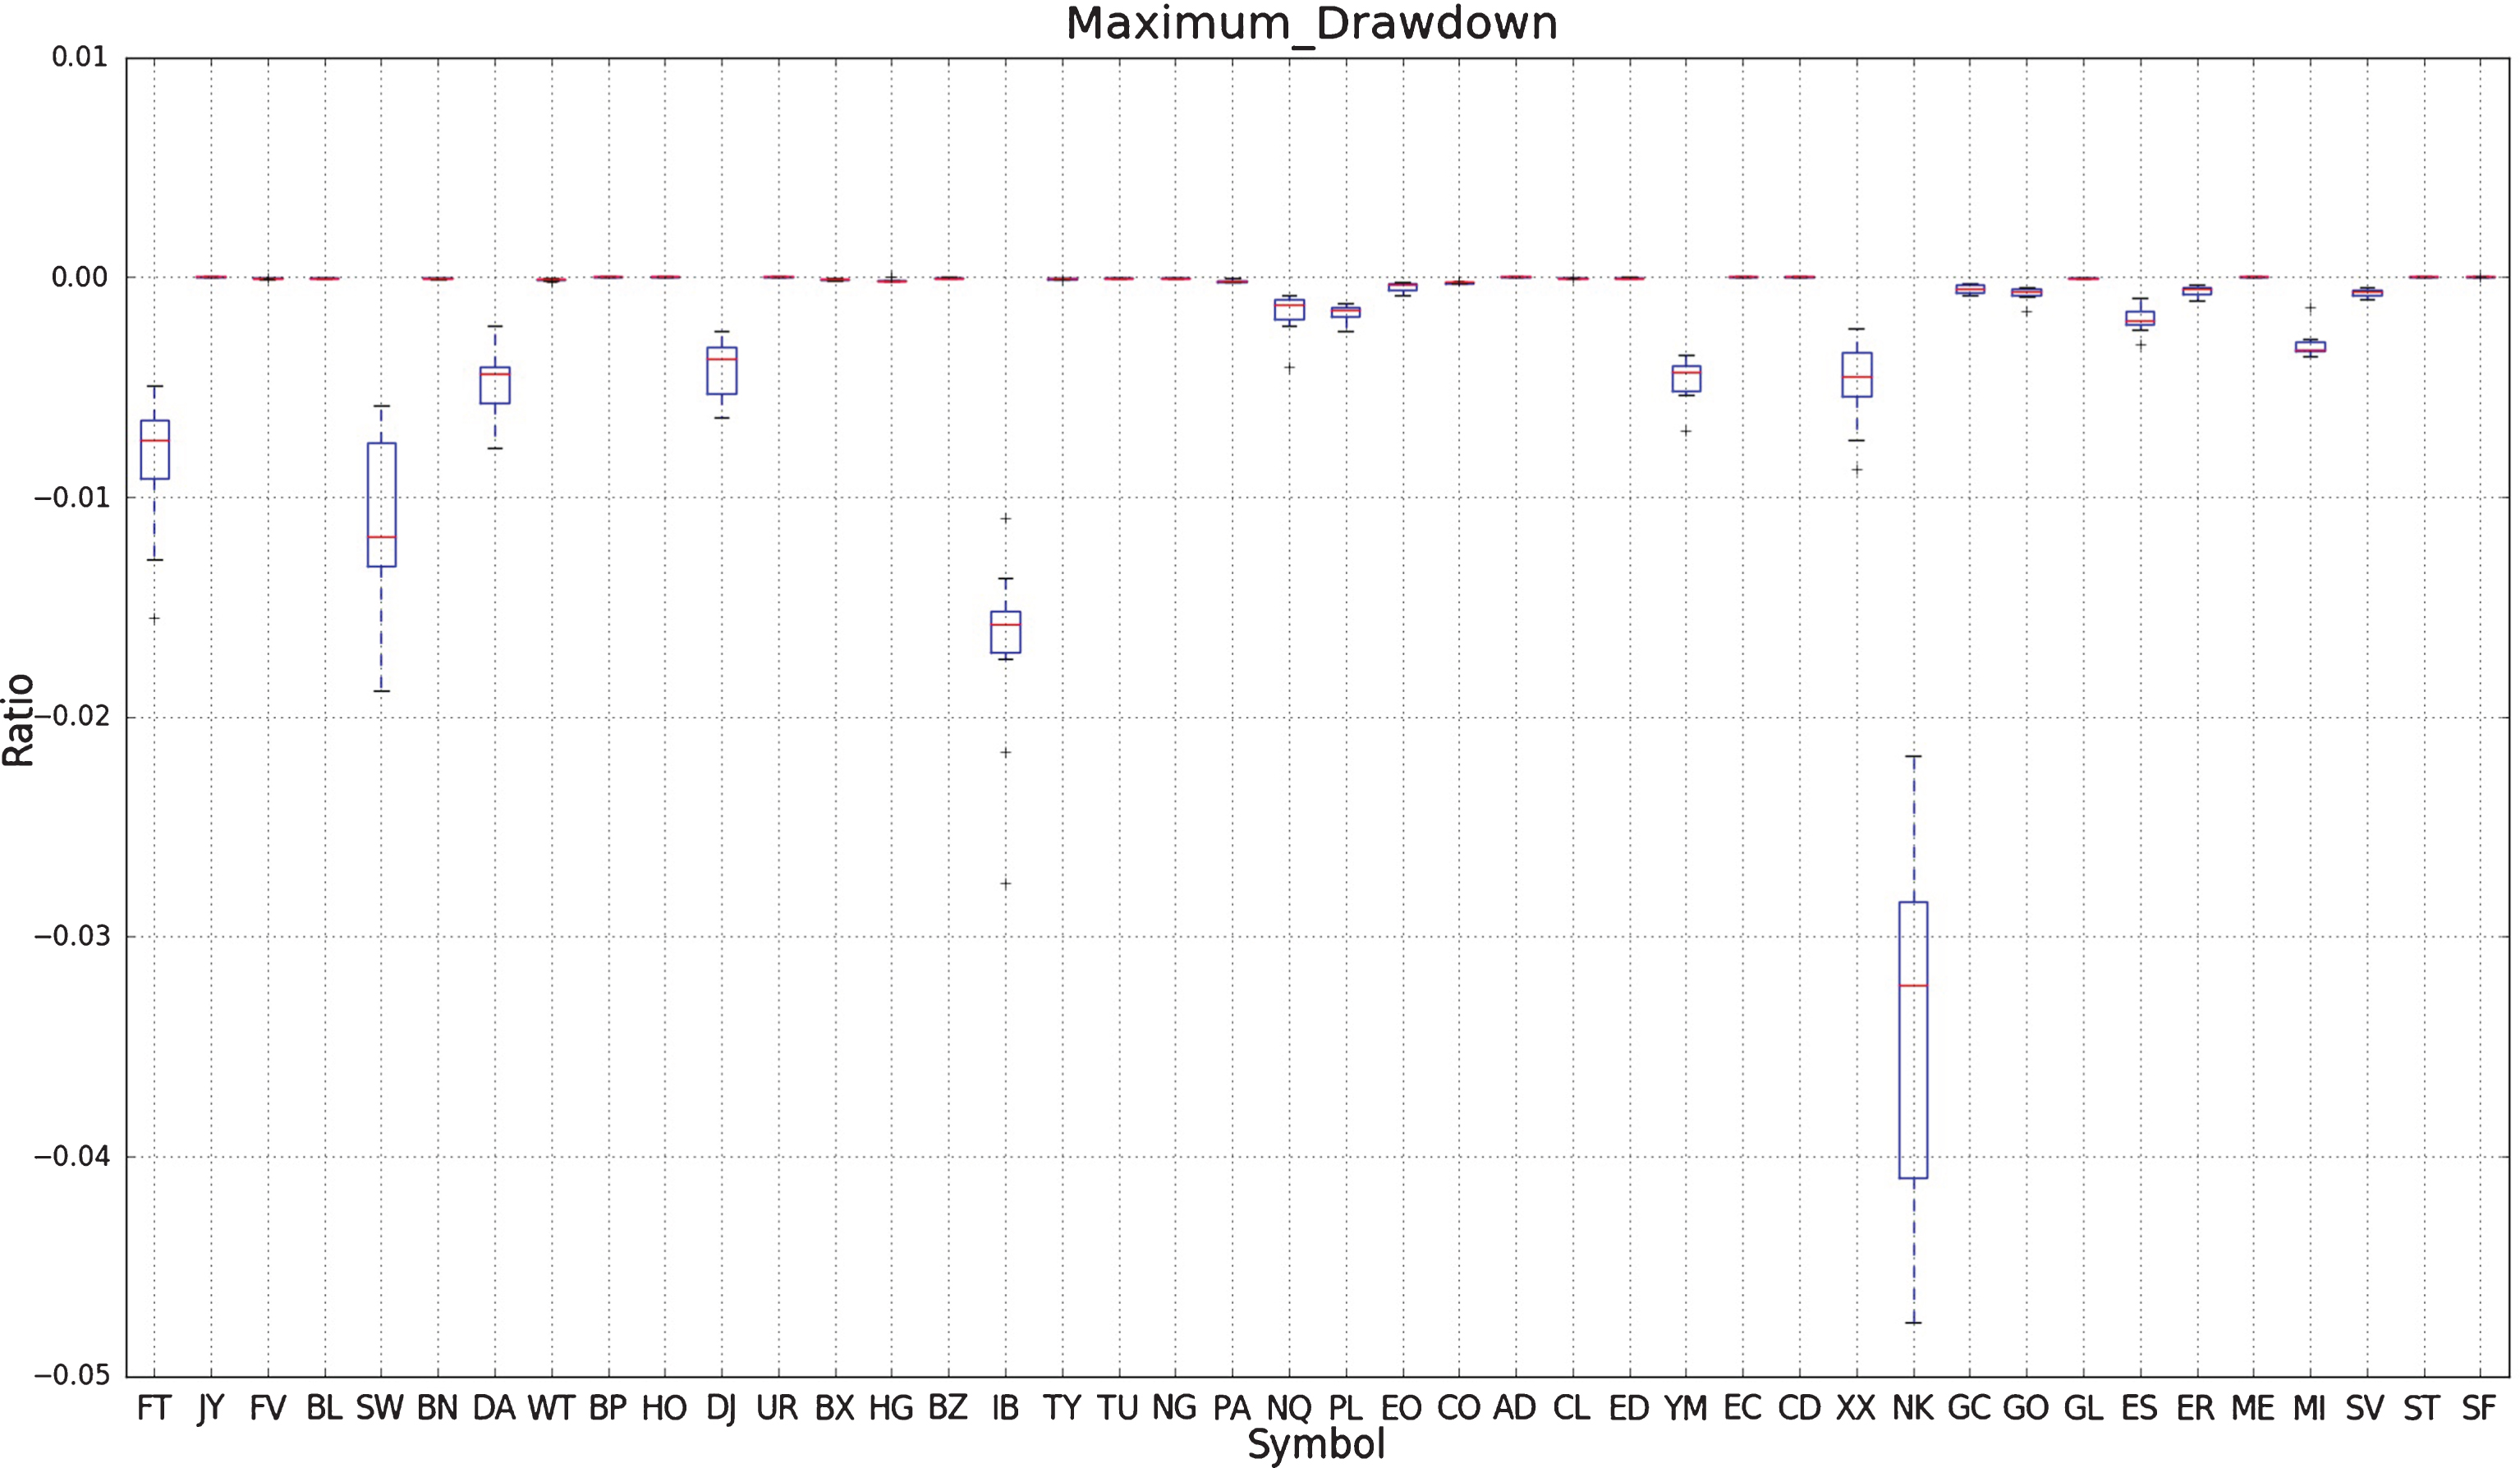 This figure shows a box plot of the maximum drawdown of a simple strategy applied over ten walk forward experiments for each symbol.